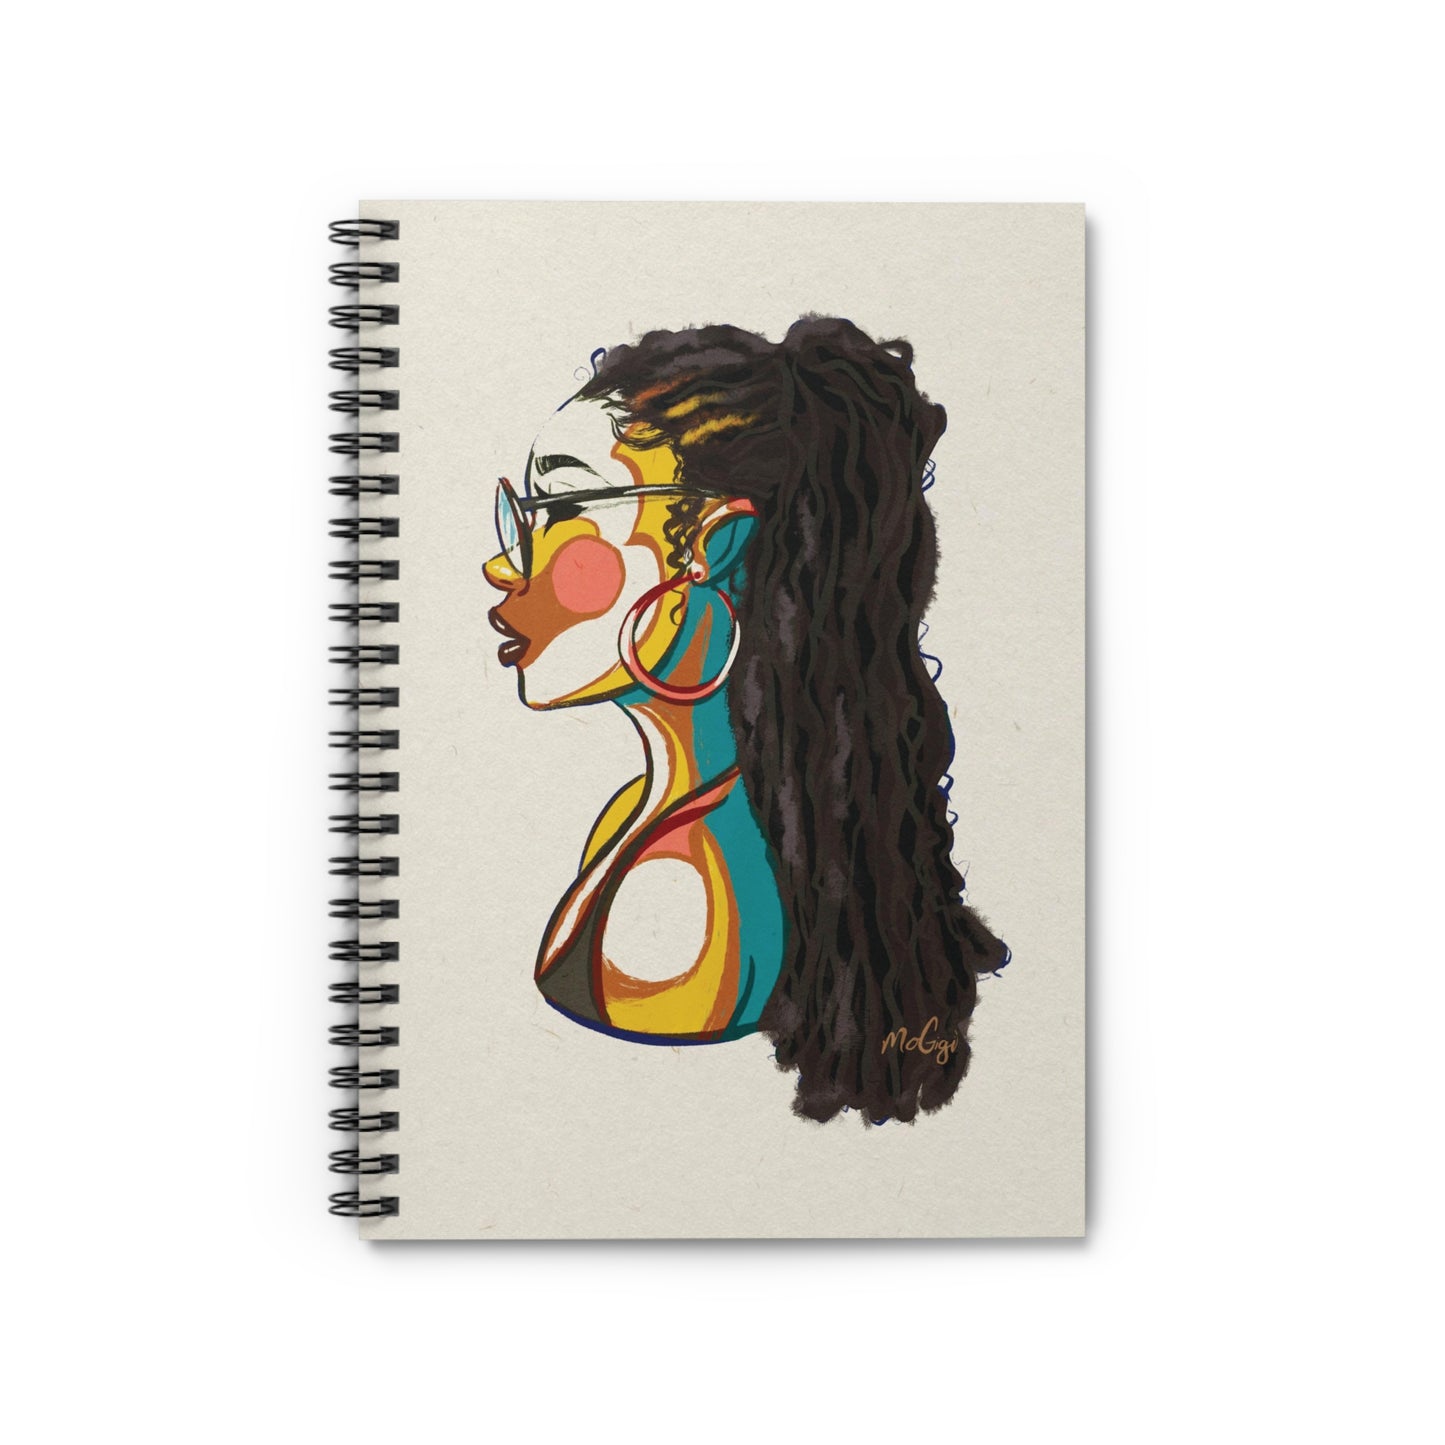 Black Woman Notebook, Afro Natural Hair Locs Art, Spiral Lined Melanin Self-Care Journal for Natural Hair Queens